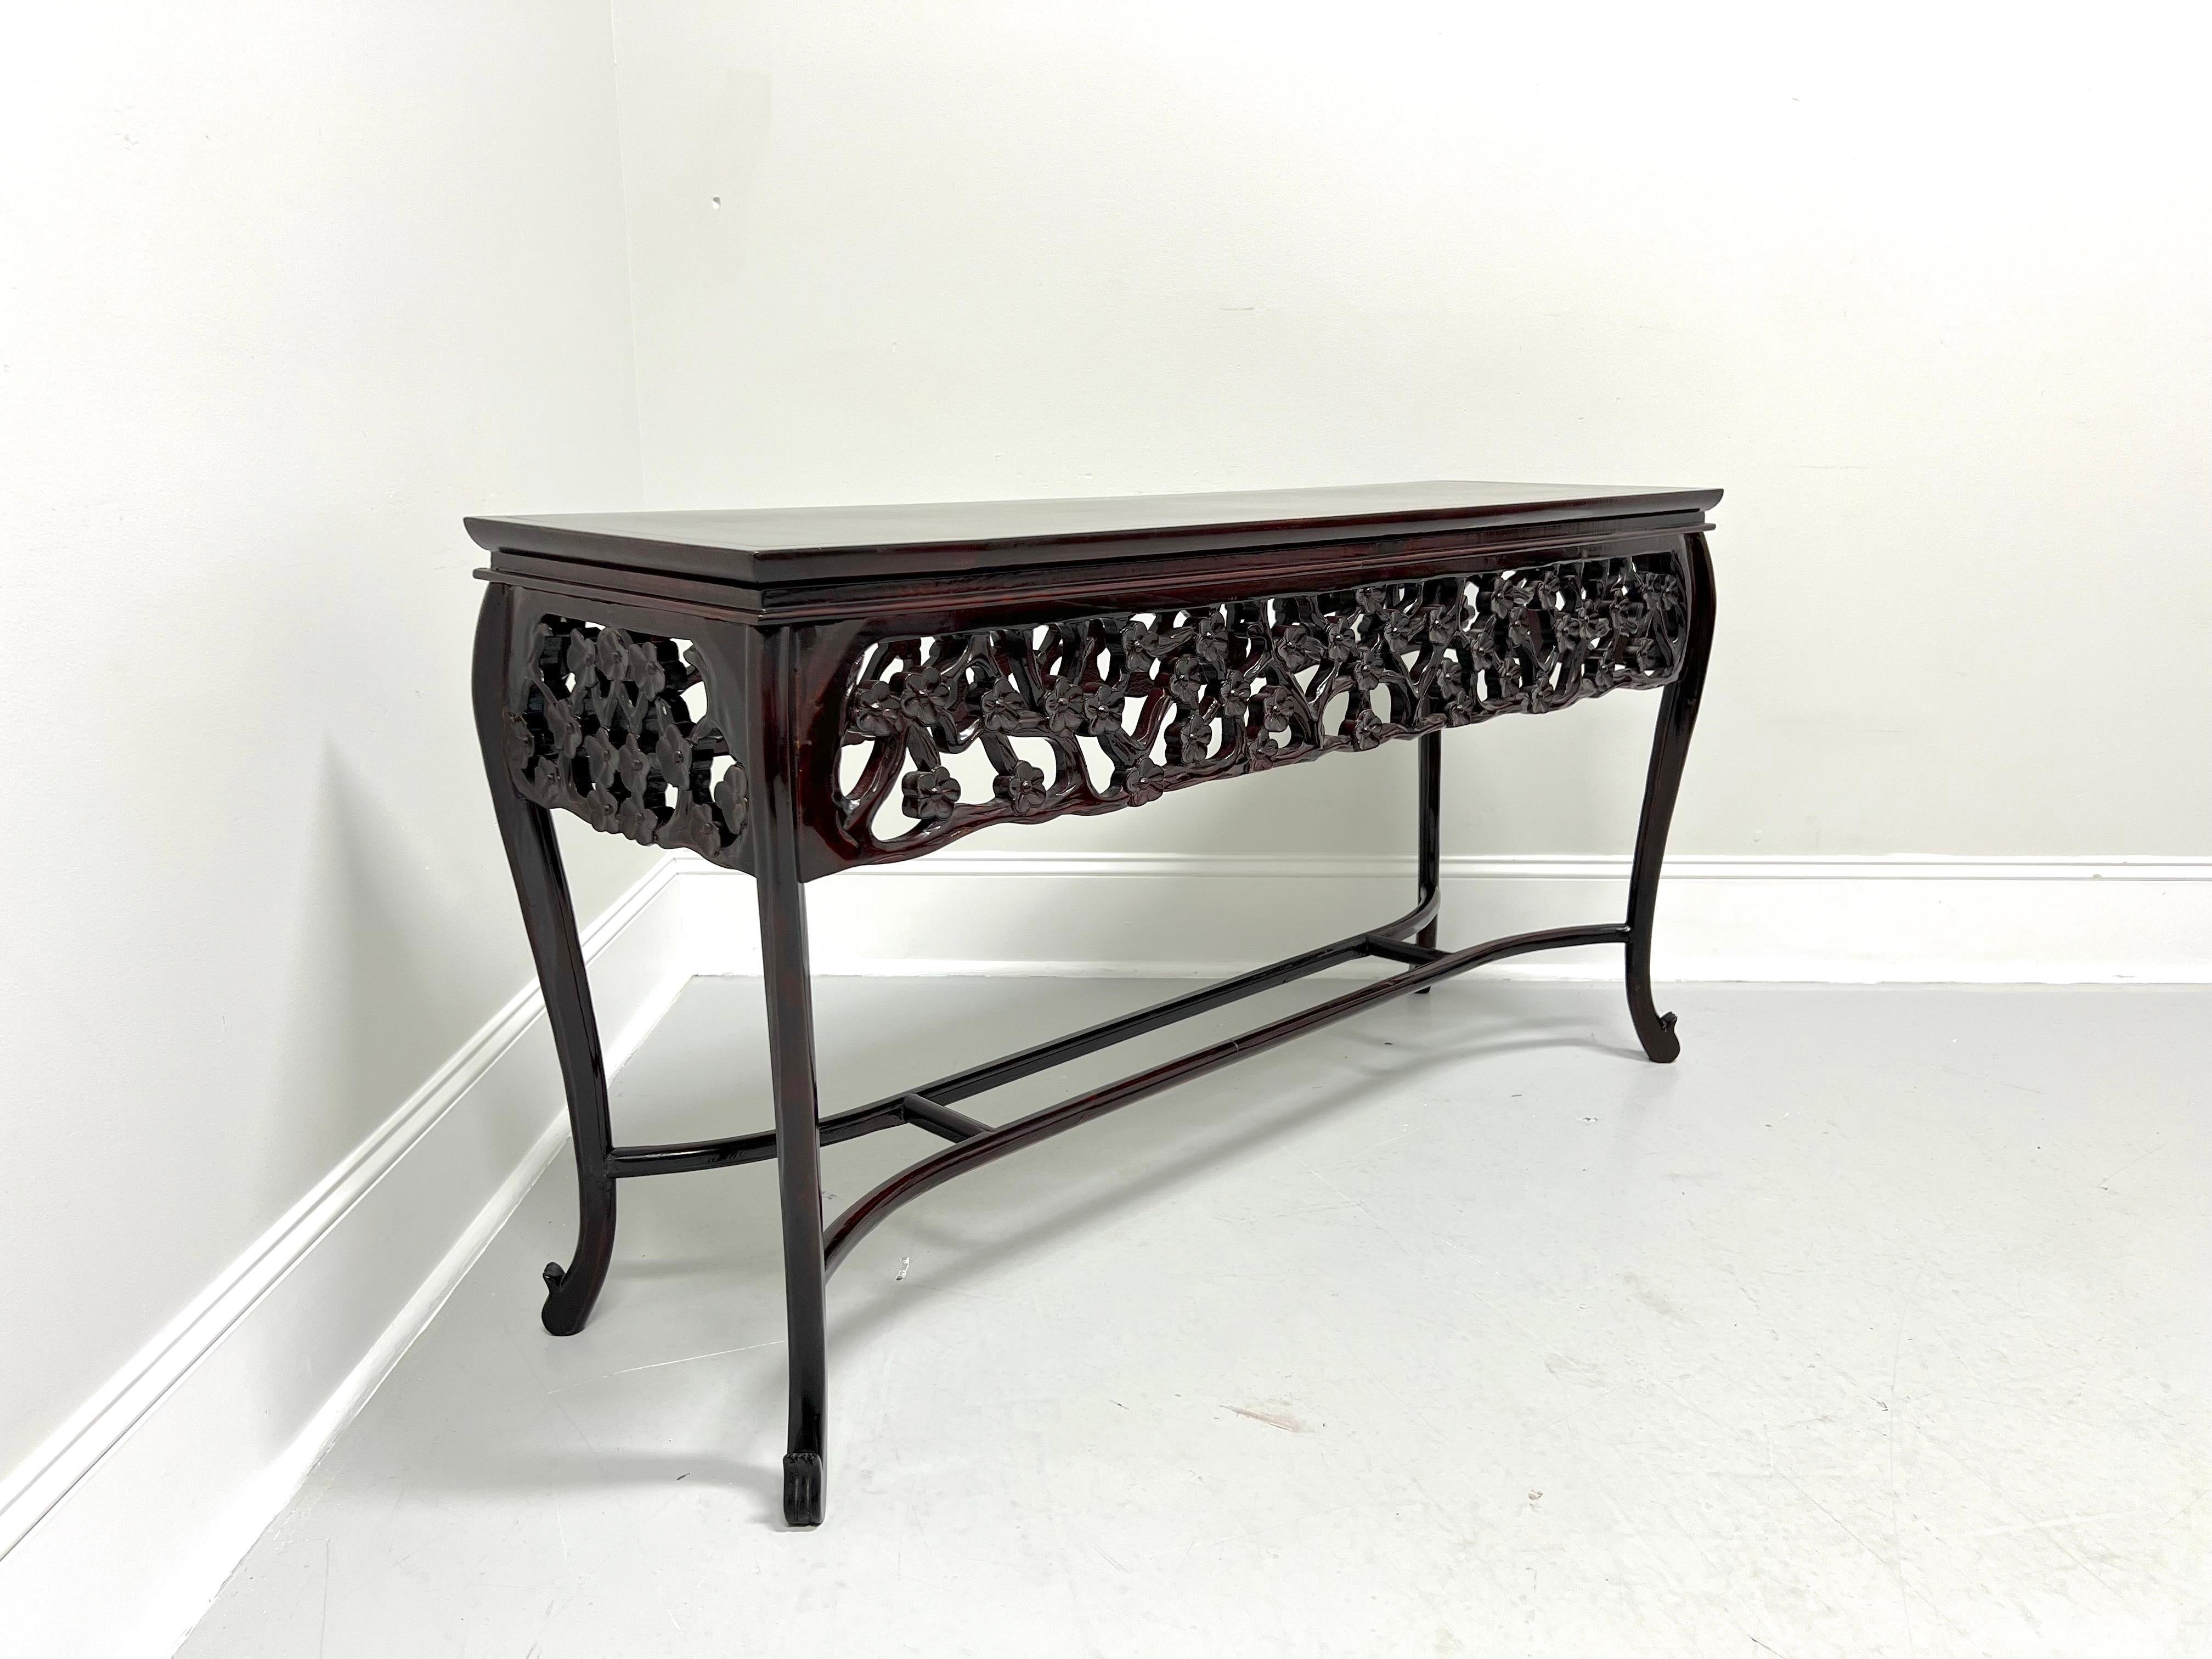 An Asian style console sofa table, unbranded. Unknown wood type with a rosewood finish, banded top with miter edge, decoratively carved floral & branches apron, curved legs, stretchers forming an undertier, and modified paw feet. Likely made in